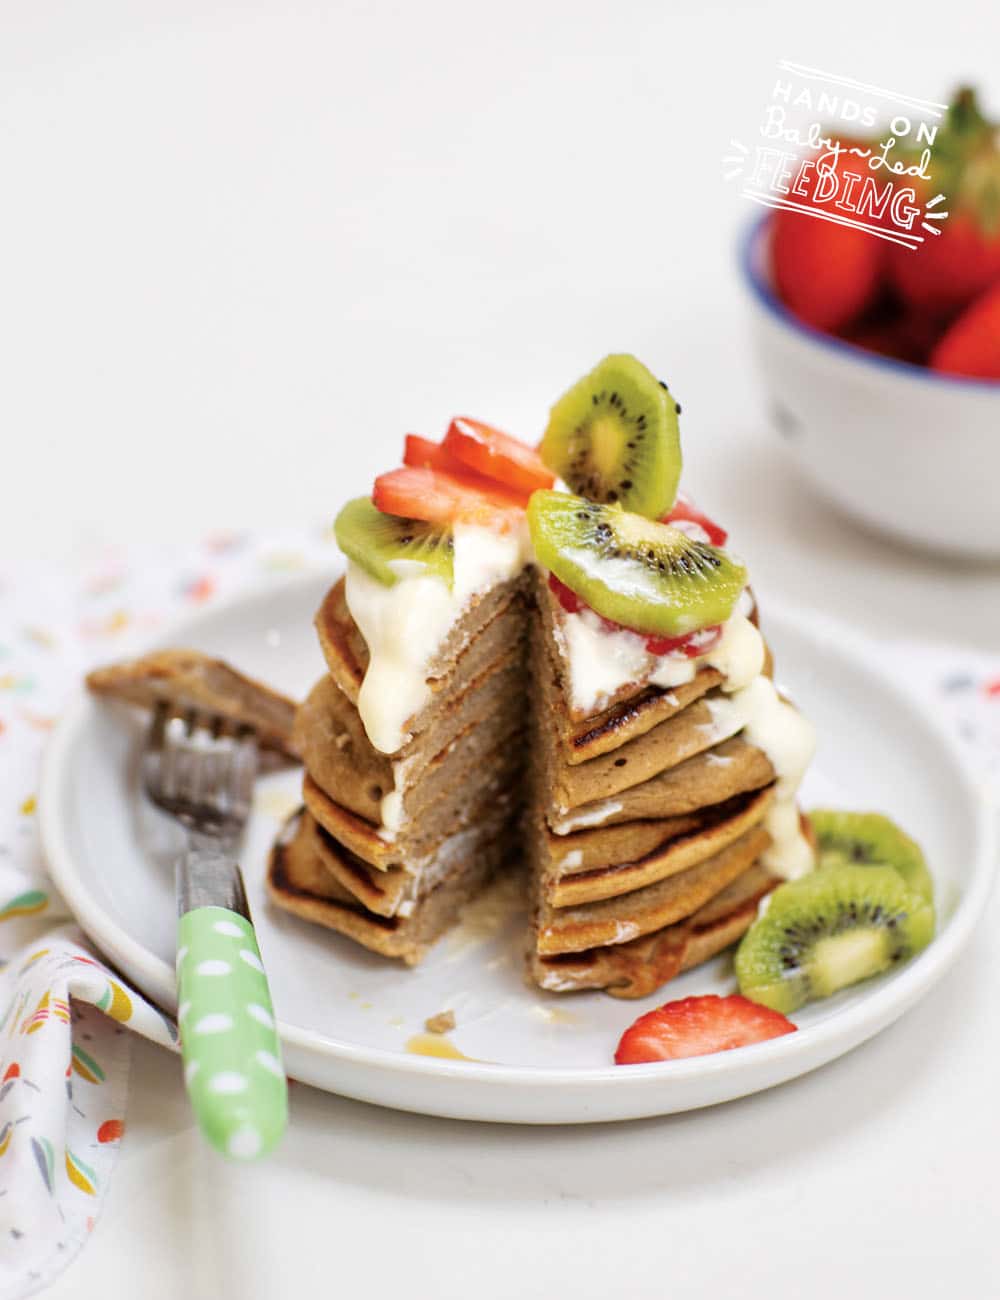 An easy & healthy idea for baby breakfast that can be made all in one blender! Made with nutritious oats and yummy strawberries, kiwi, and banana, this baby pancake is great for 6 mo+! Naturally sweetened with fruit, this healthy baby breakfast is refined sugar-free. #babyledweaning #babyledfeeding #pancakes #babybreakfast #babyfood #pancaketuesday 